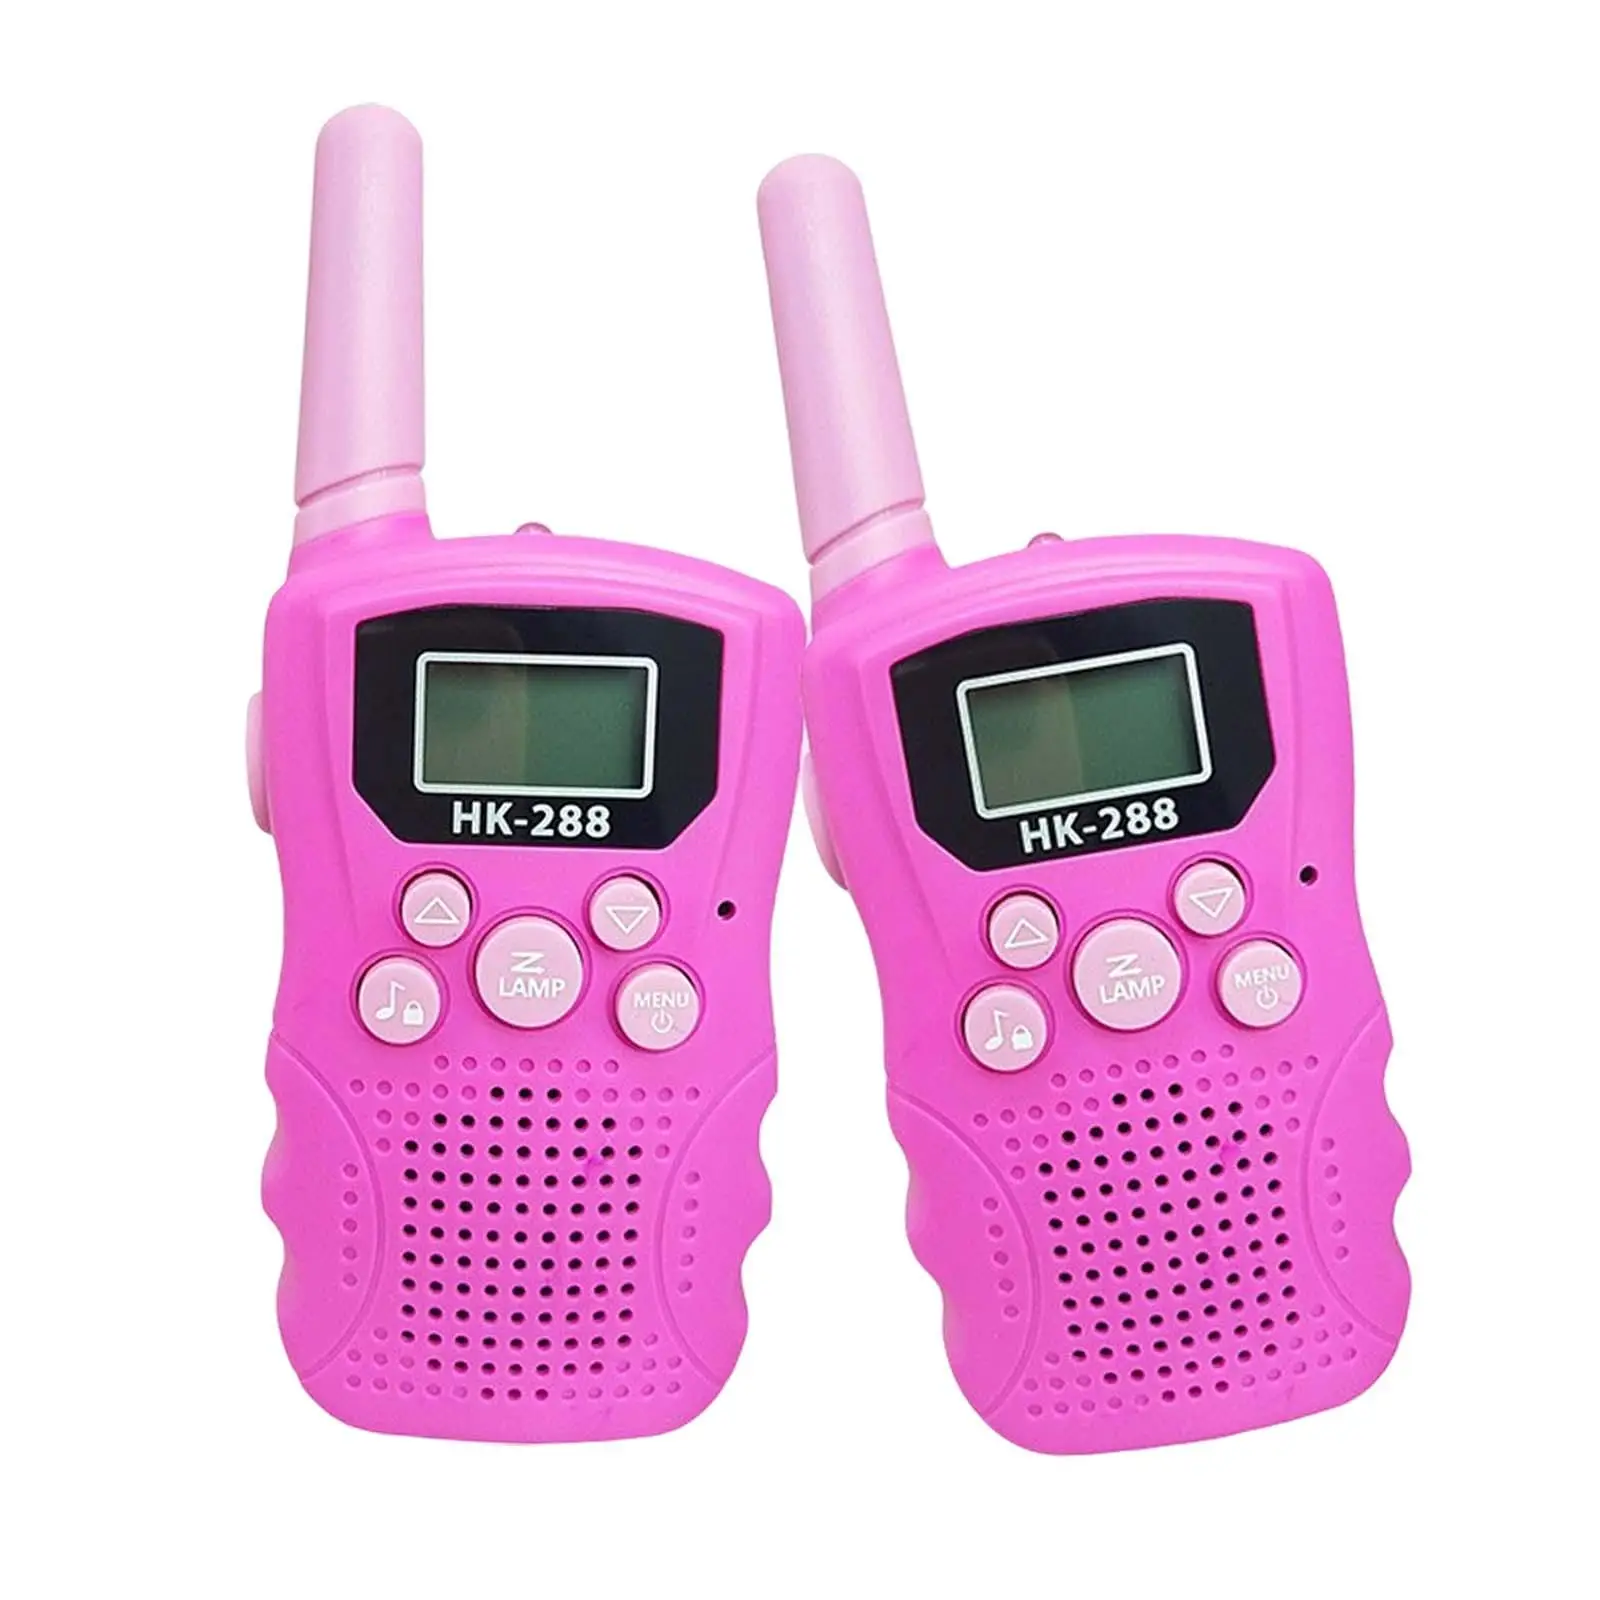 1Pair Walkie Talkie Children 22 Channels with Flashlight Talky for 3-12 Years Old Camping Family Games Teens Hiking Outside